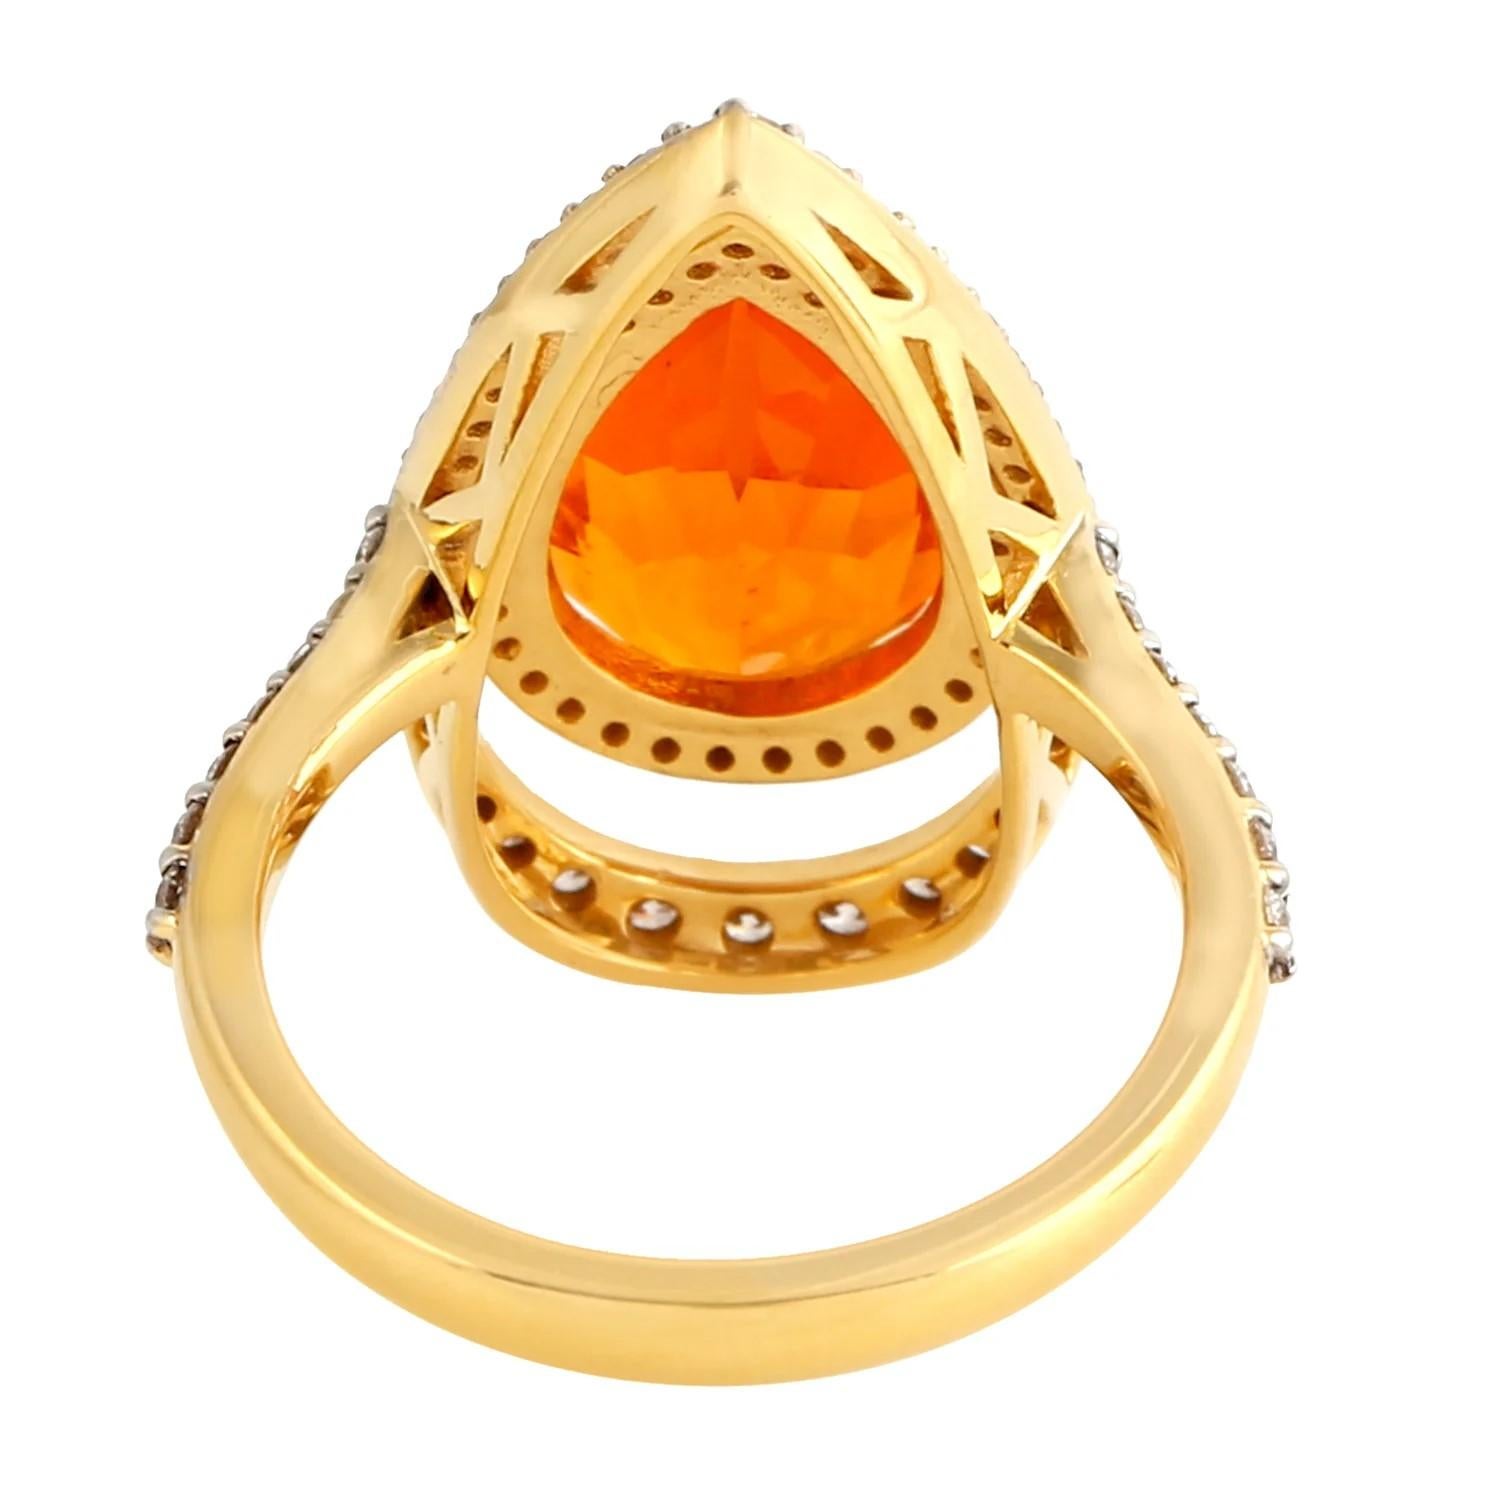 This exquisite ring is handcrafted in 18-karat gold. It is set in 3.06 carats fire opal and .77 carats of sparkling diamonds.

FOLLOW MEGHNA JEWELS storefront to view the latest collection & exclusive pieces. Meghna Jewels is proudly rated as a Top